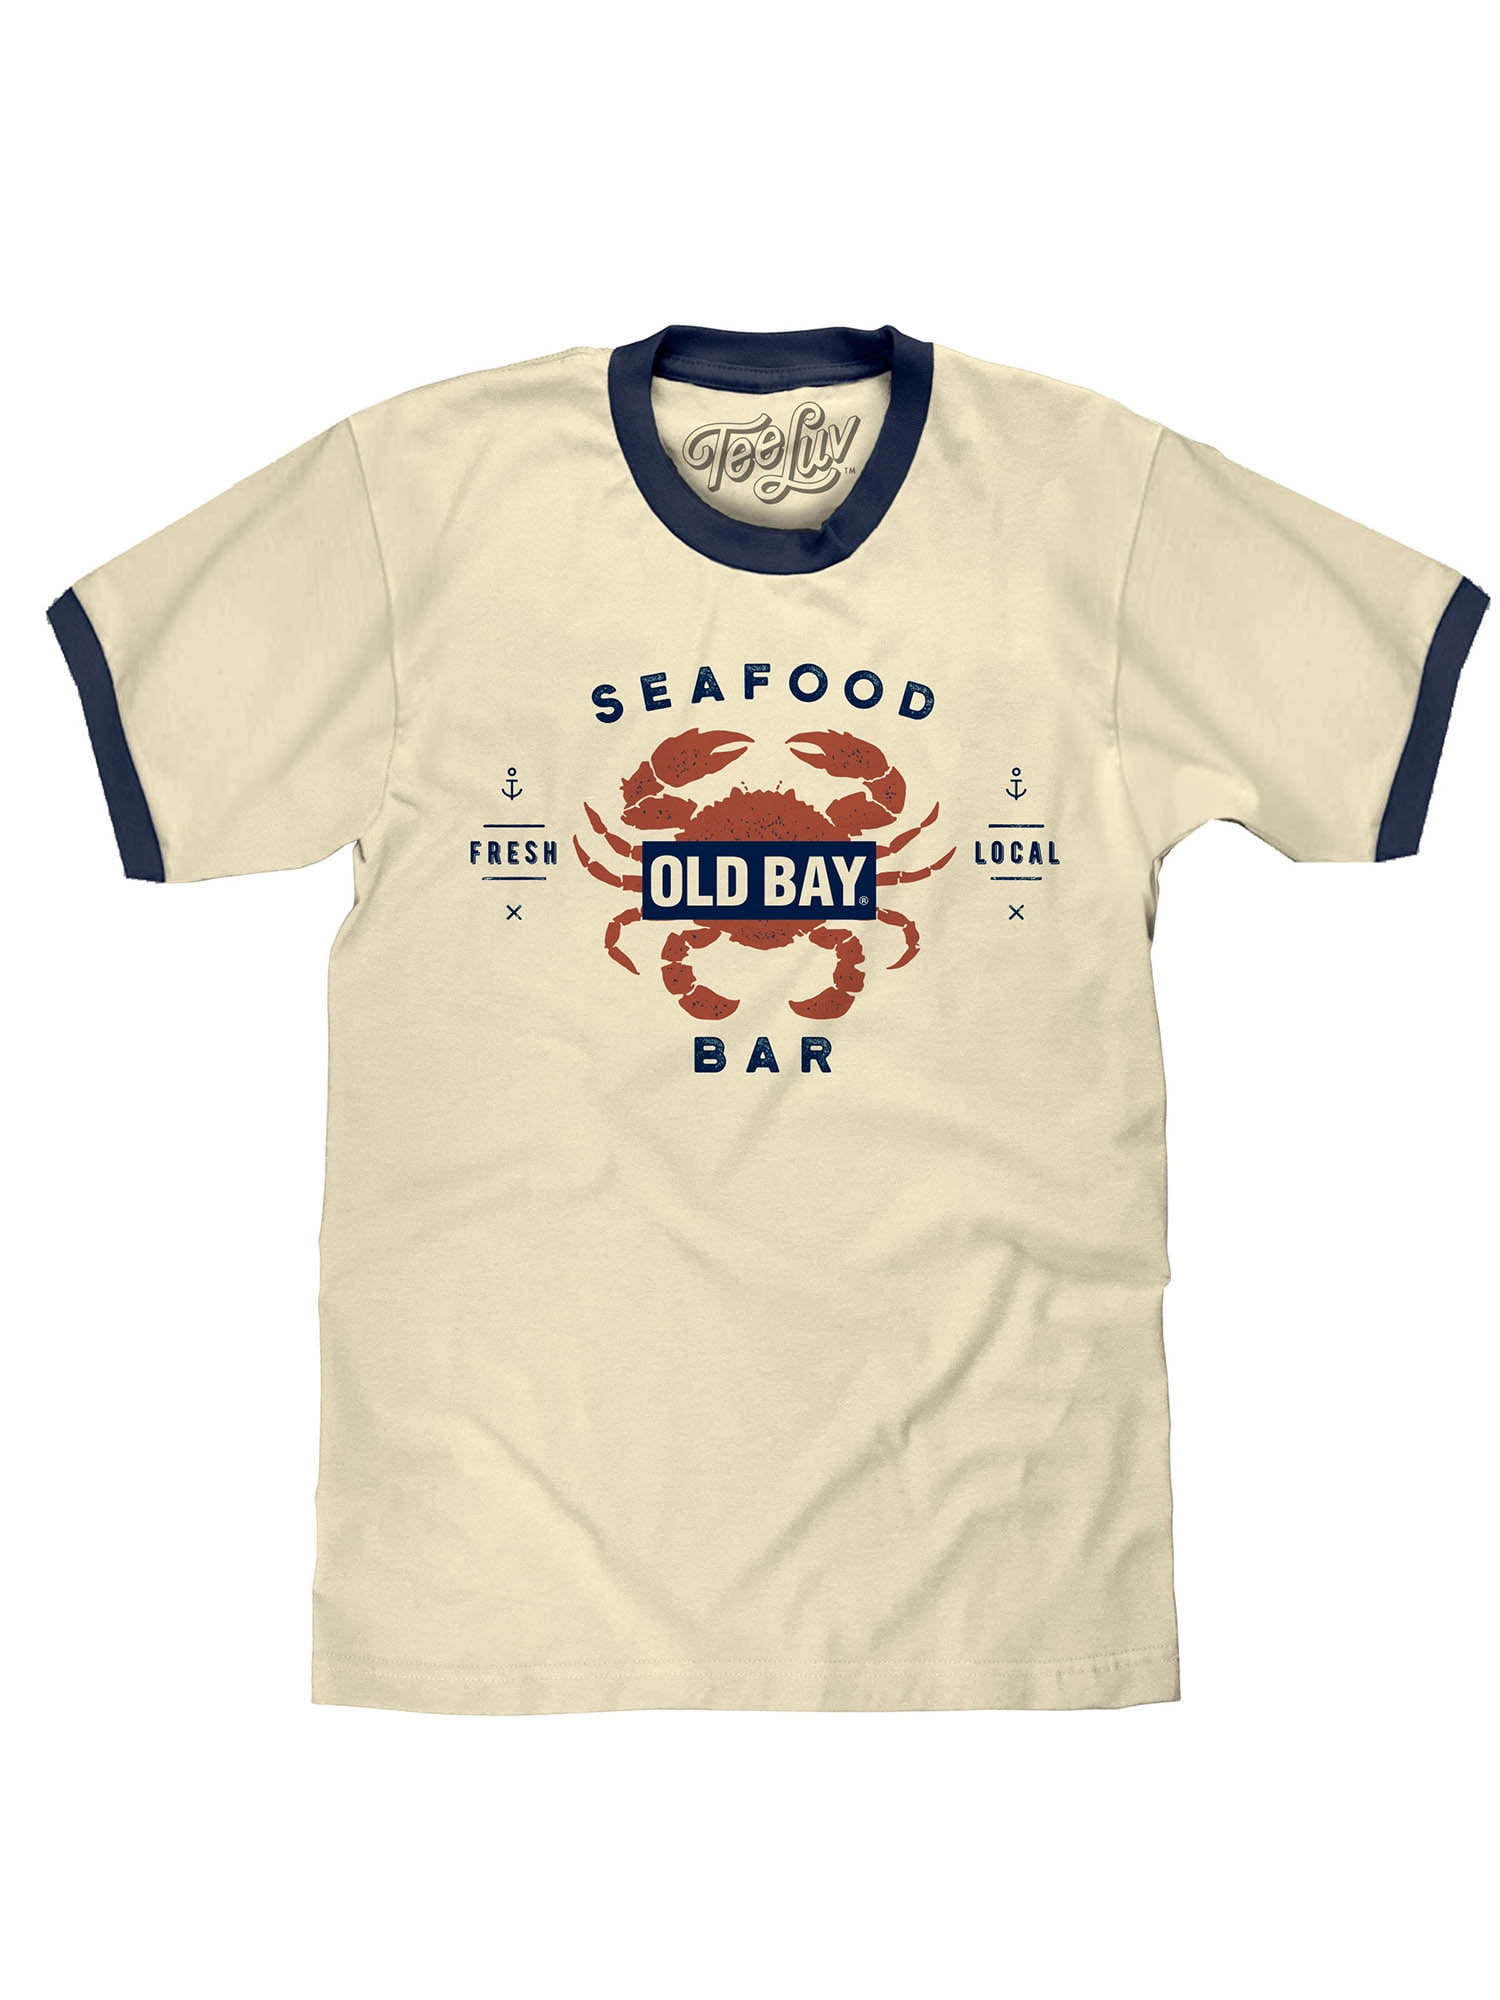 Land of the Free Home of Old Bay T-Shirt Seafood Seasoning Spice Rub Crab Adult